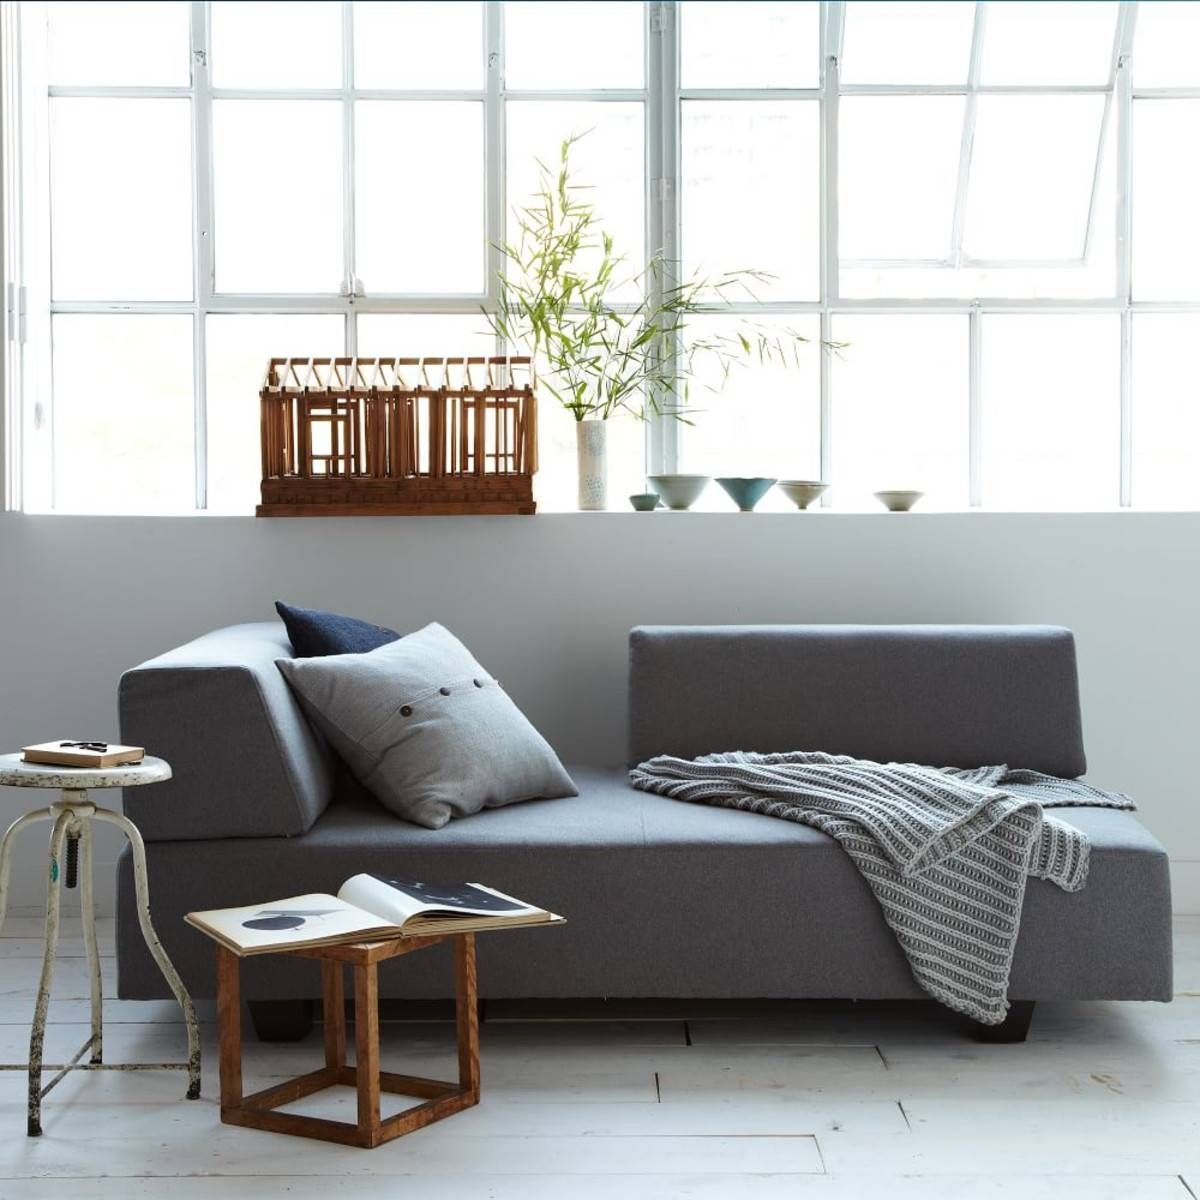 Furniture: Henry Sectional West Elm Reviews | West Elm Furniture Throughout West Elm Henry Sectional Sofas (View 12 of 15)